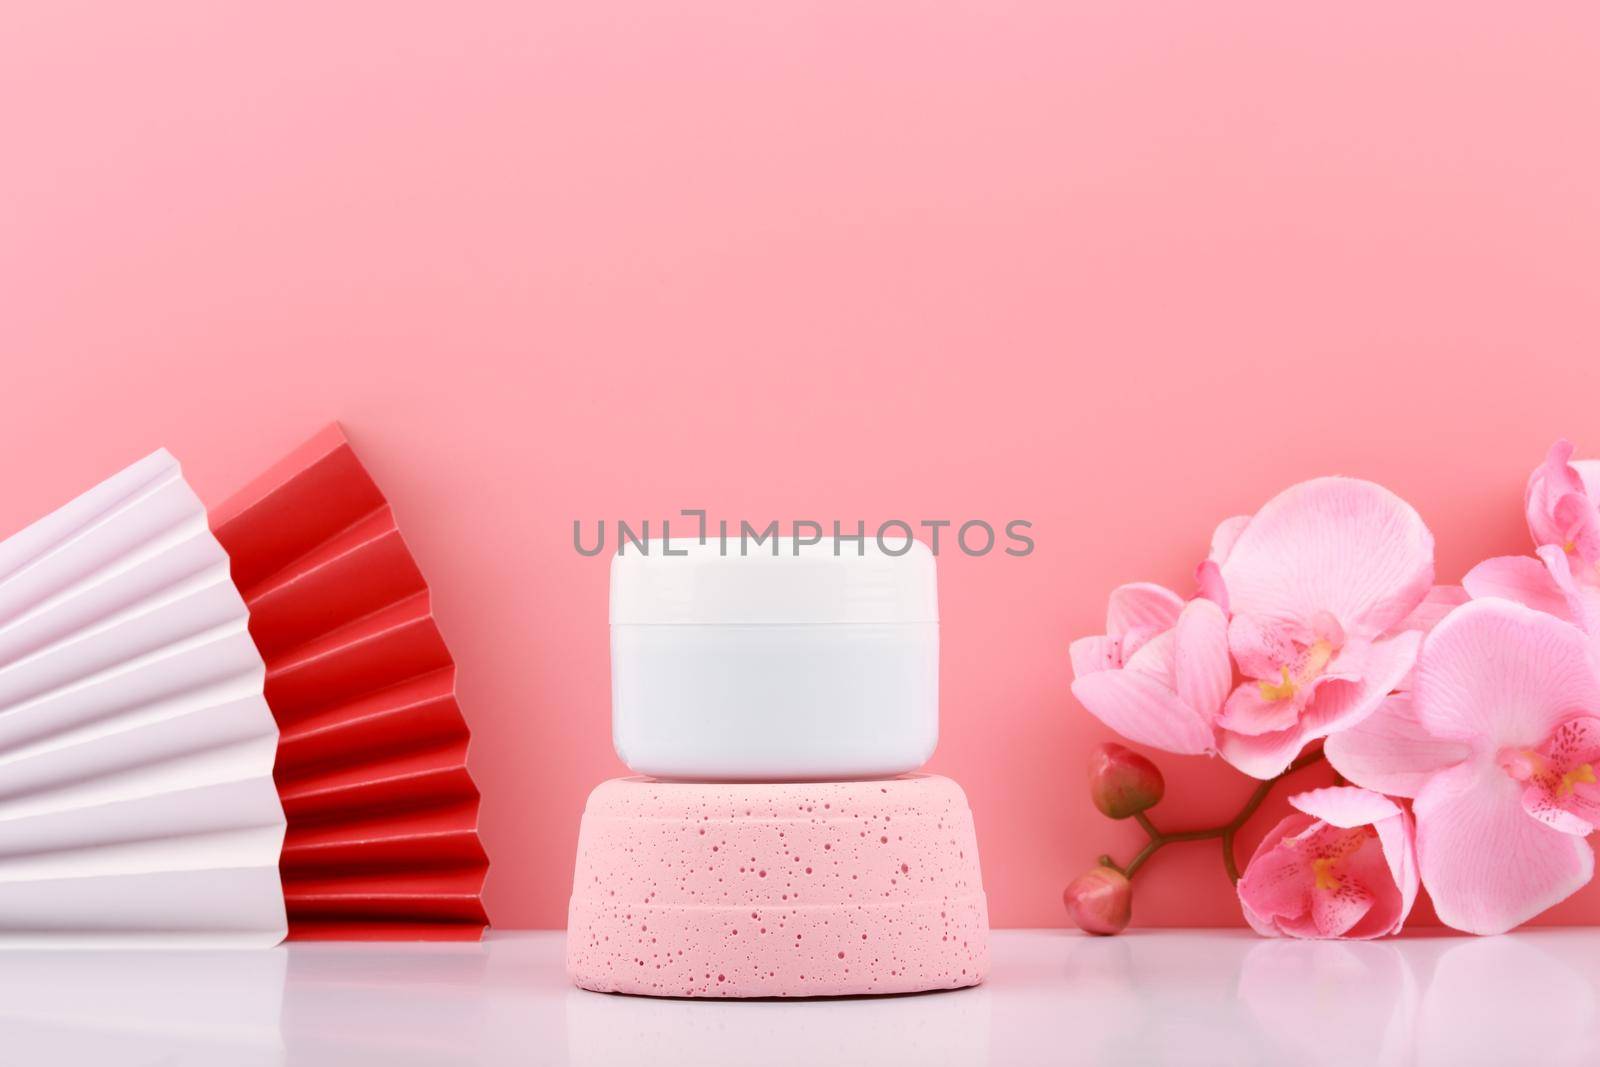 White cosmetic jar on pink pedestal against pink background with copy space decorated with wavers and flowers. Concept of beauty product, hair mask, cream or scrub for skin care.